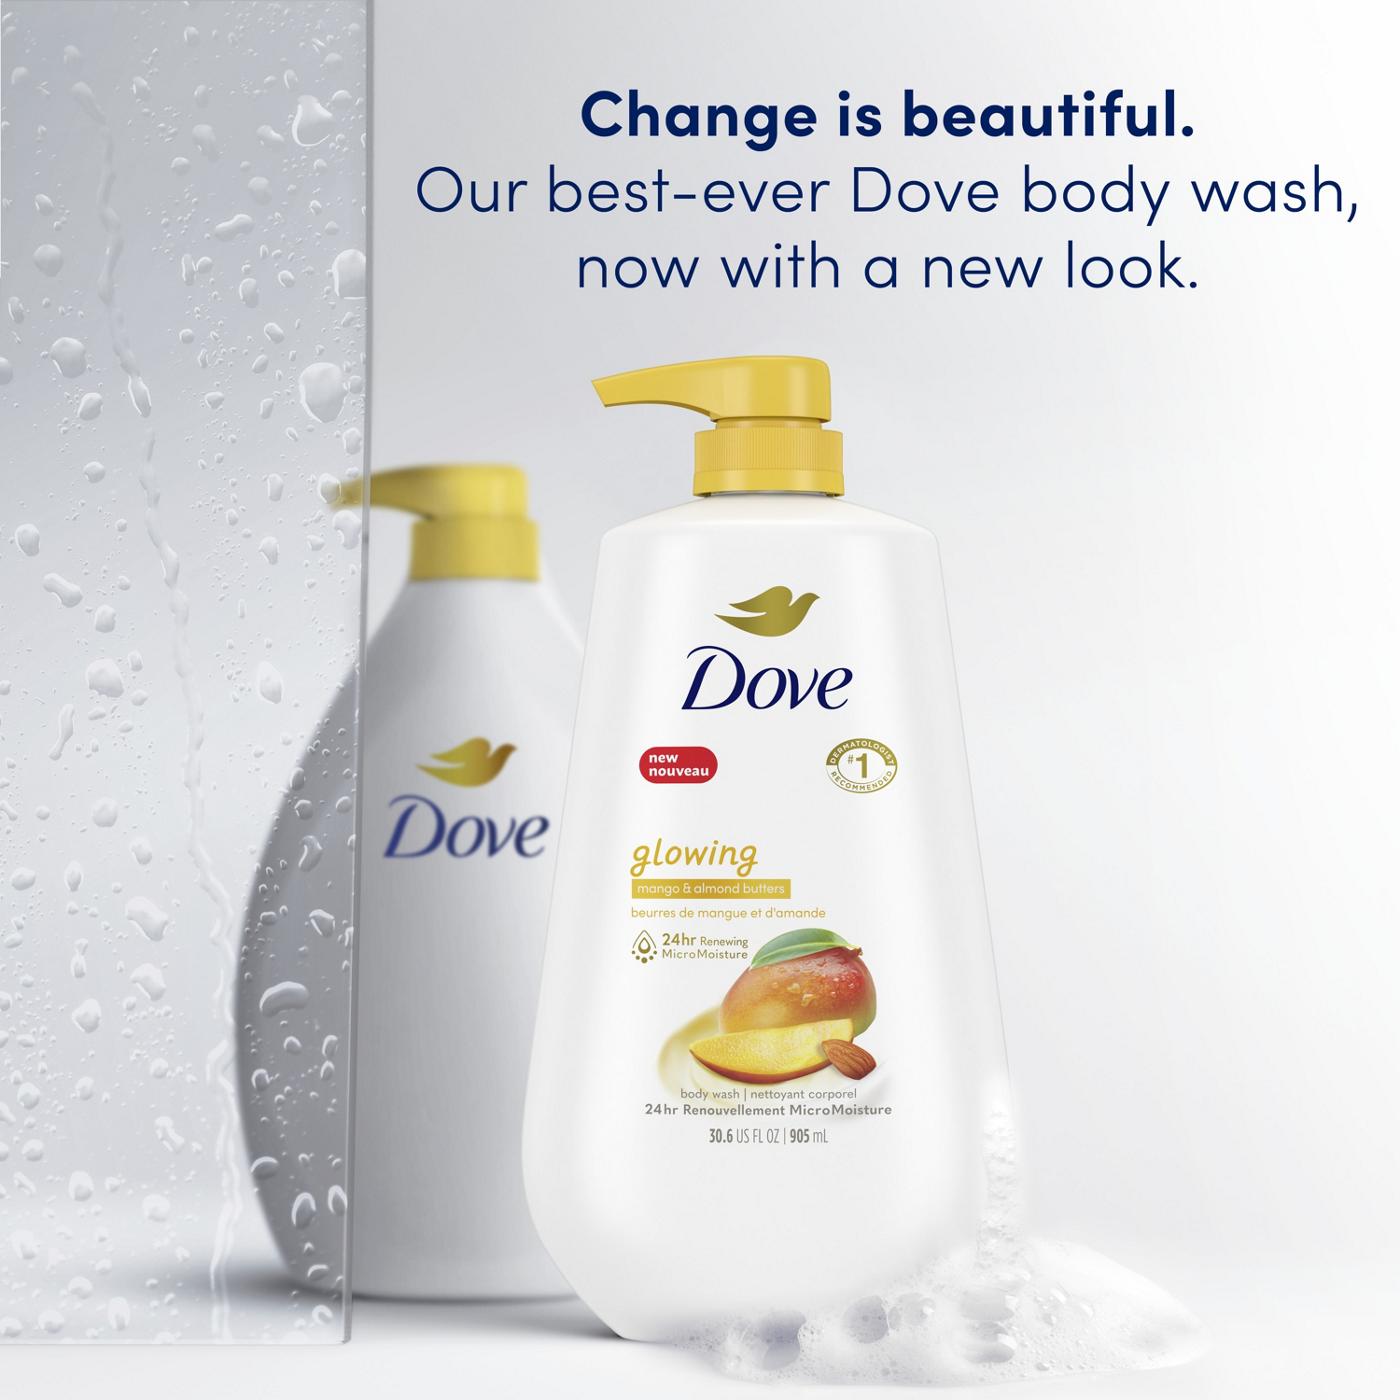 Dove Glowing Body Wash with Pump - Mango & Almond Butters ; image 6 of 9